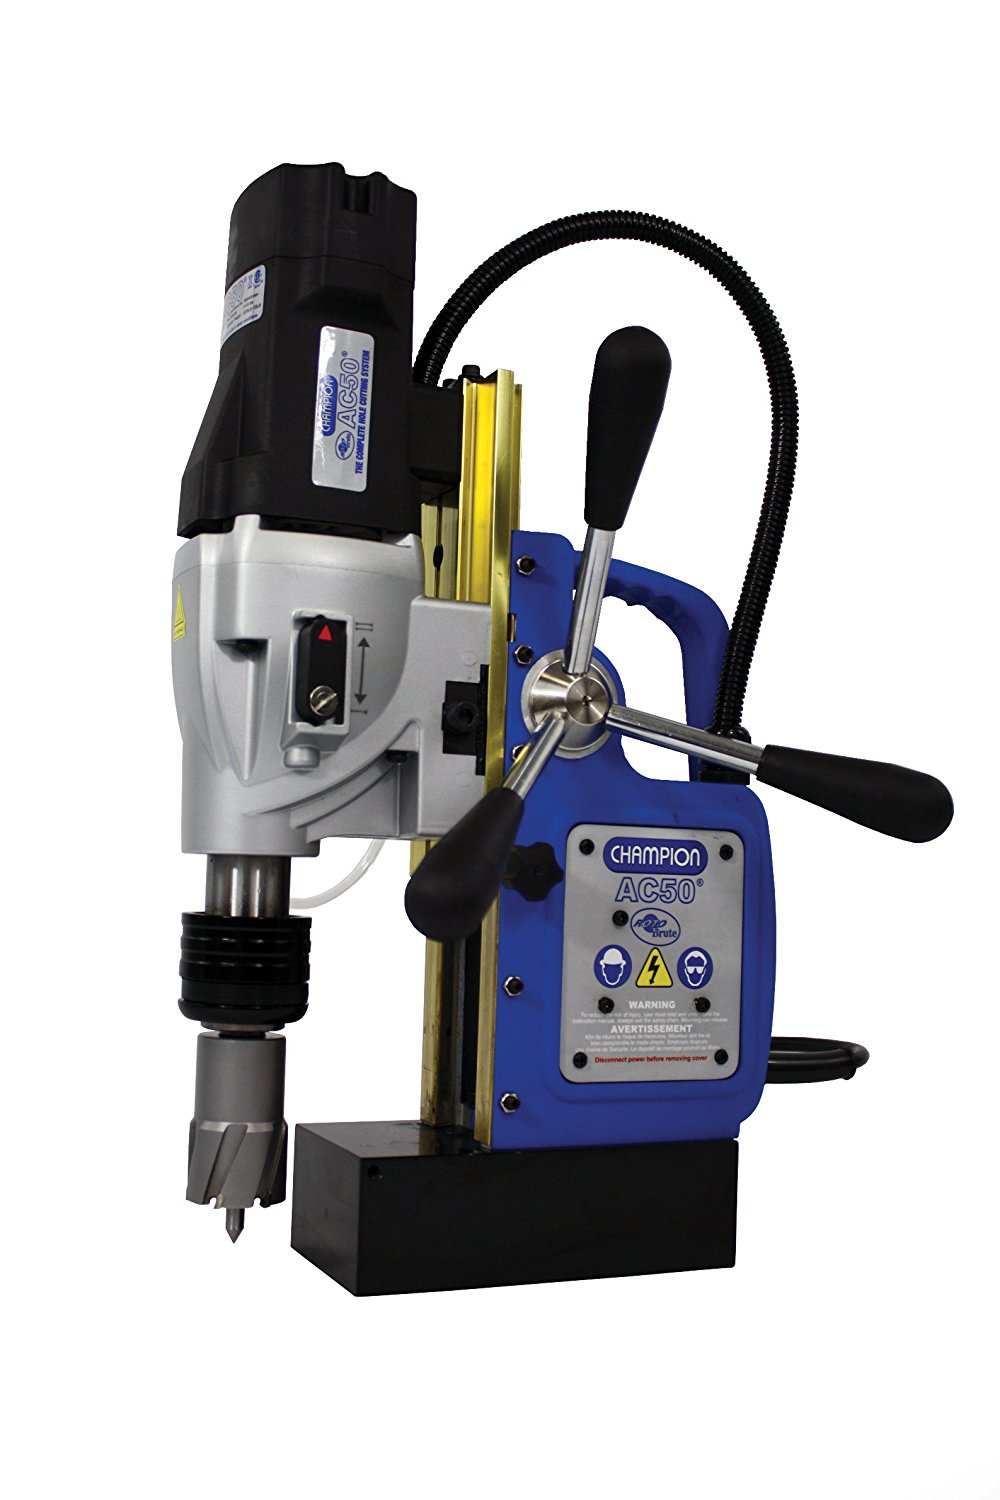 Champion Cutting Tool RotoBrute MightiBrute AC50 Portable Magnetic Drill Press: Up to 2-1/8